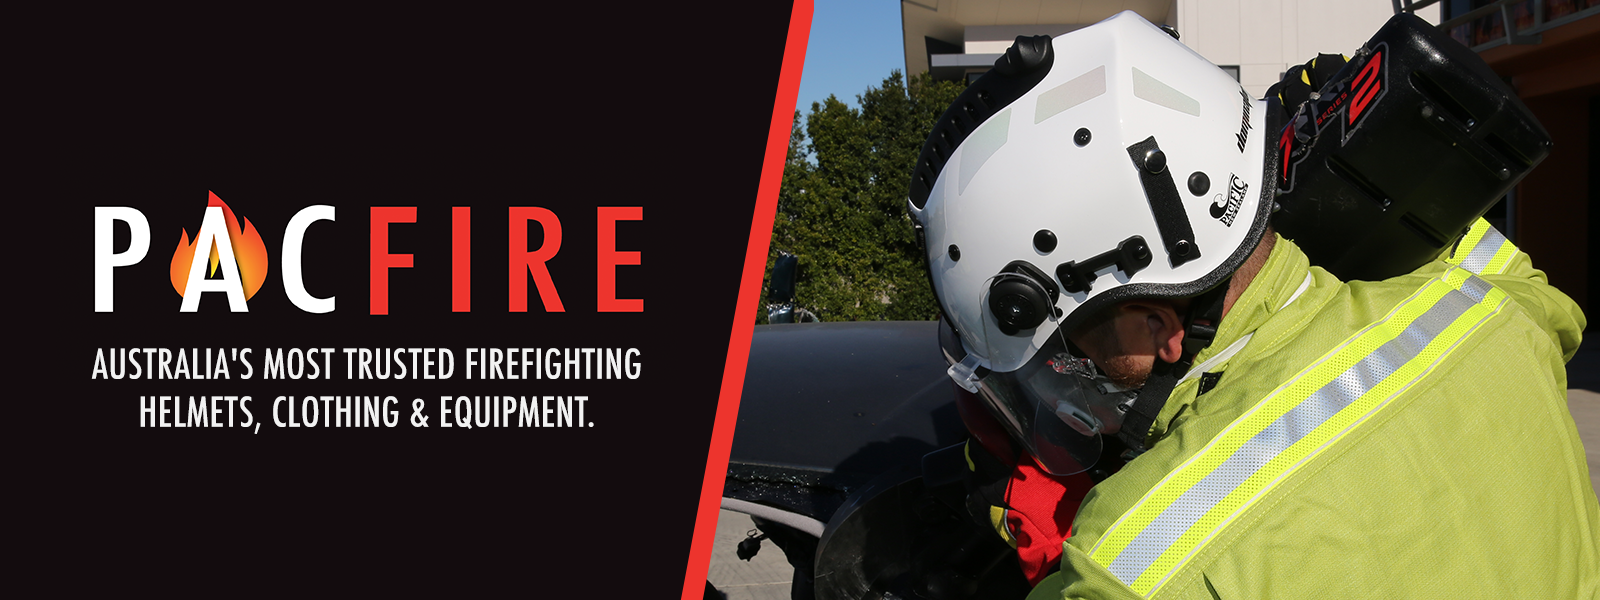 Pac Fire: Australia's most trusted firefighting helmets, clothing and equipment.